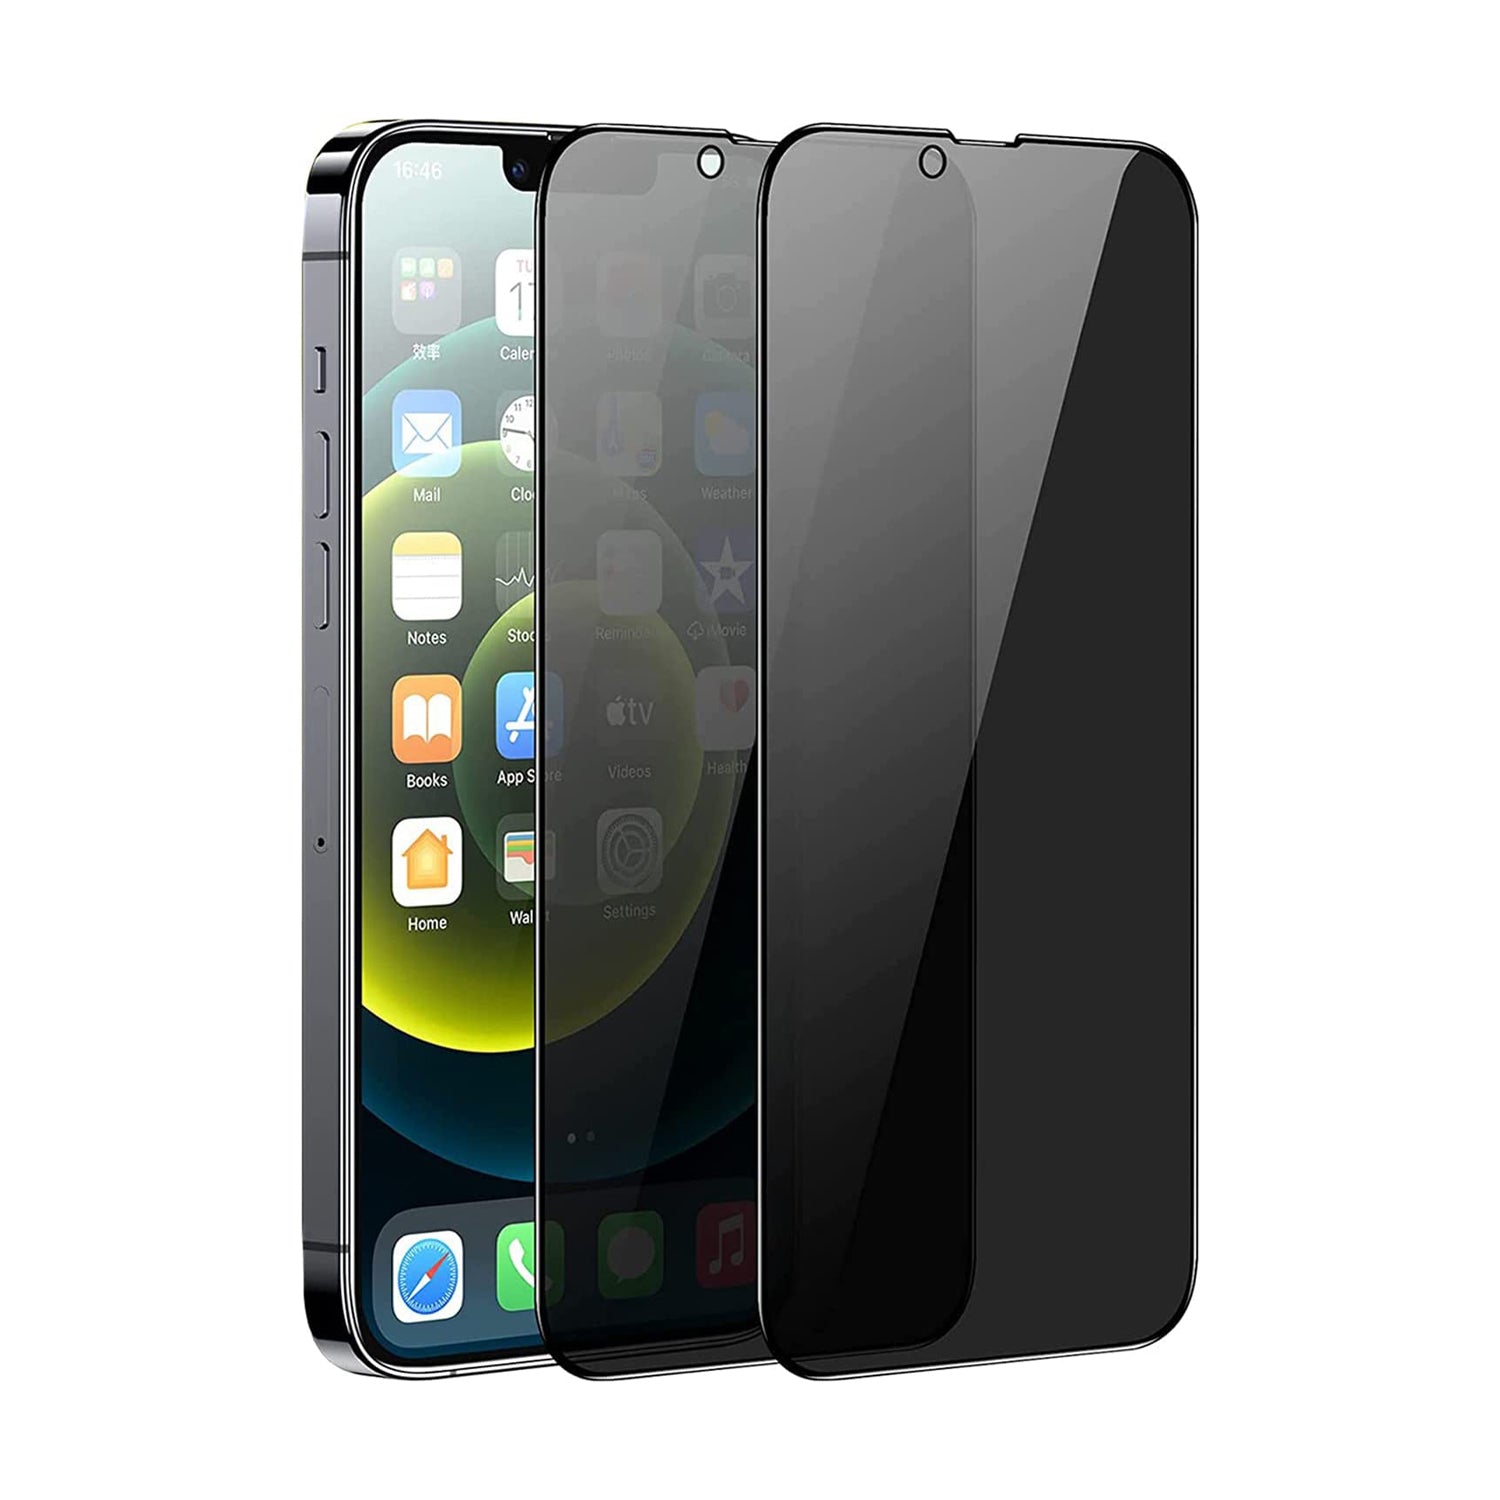 Mansoorr Camera Lens Protector for iPhone 14 Pro/iPhone 14 Pro Max - G